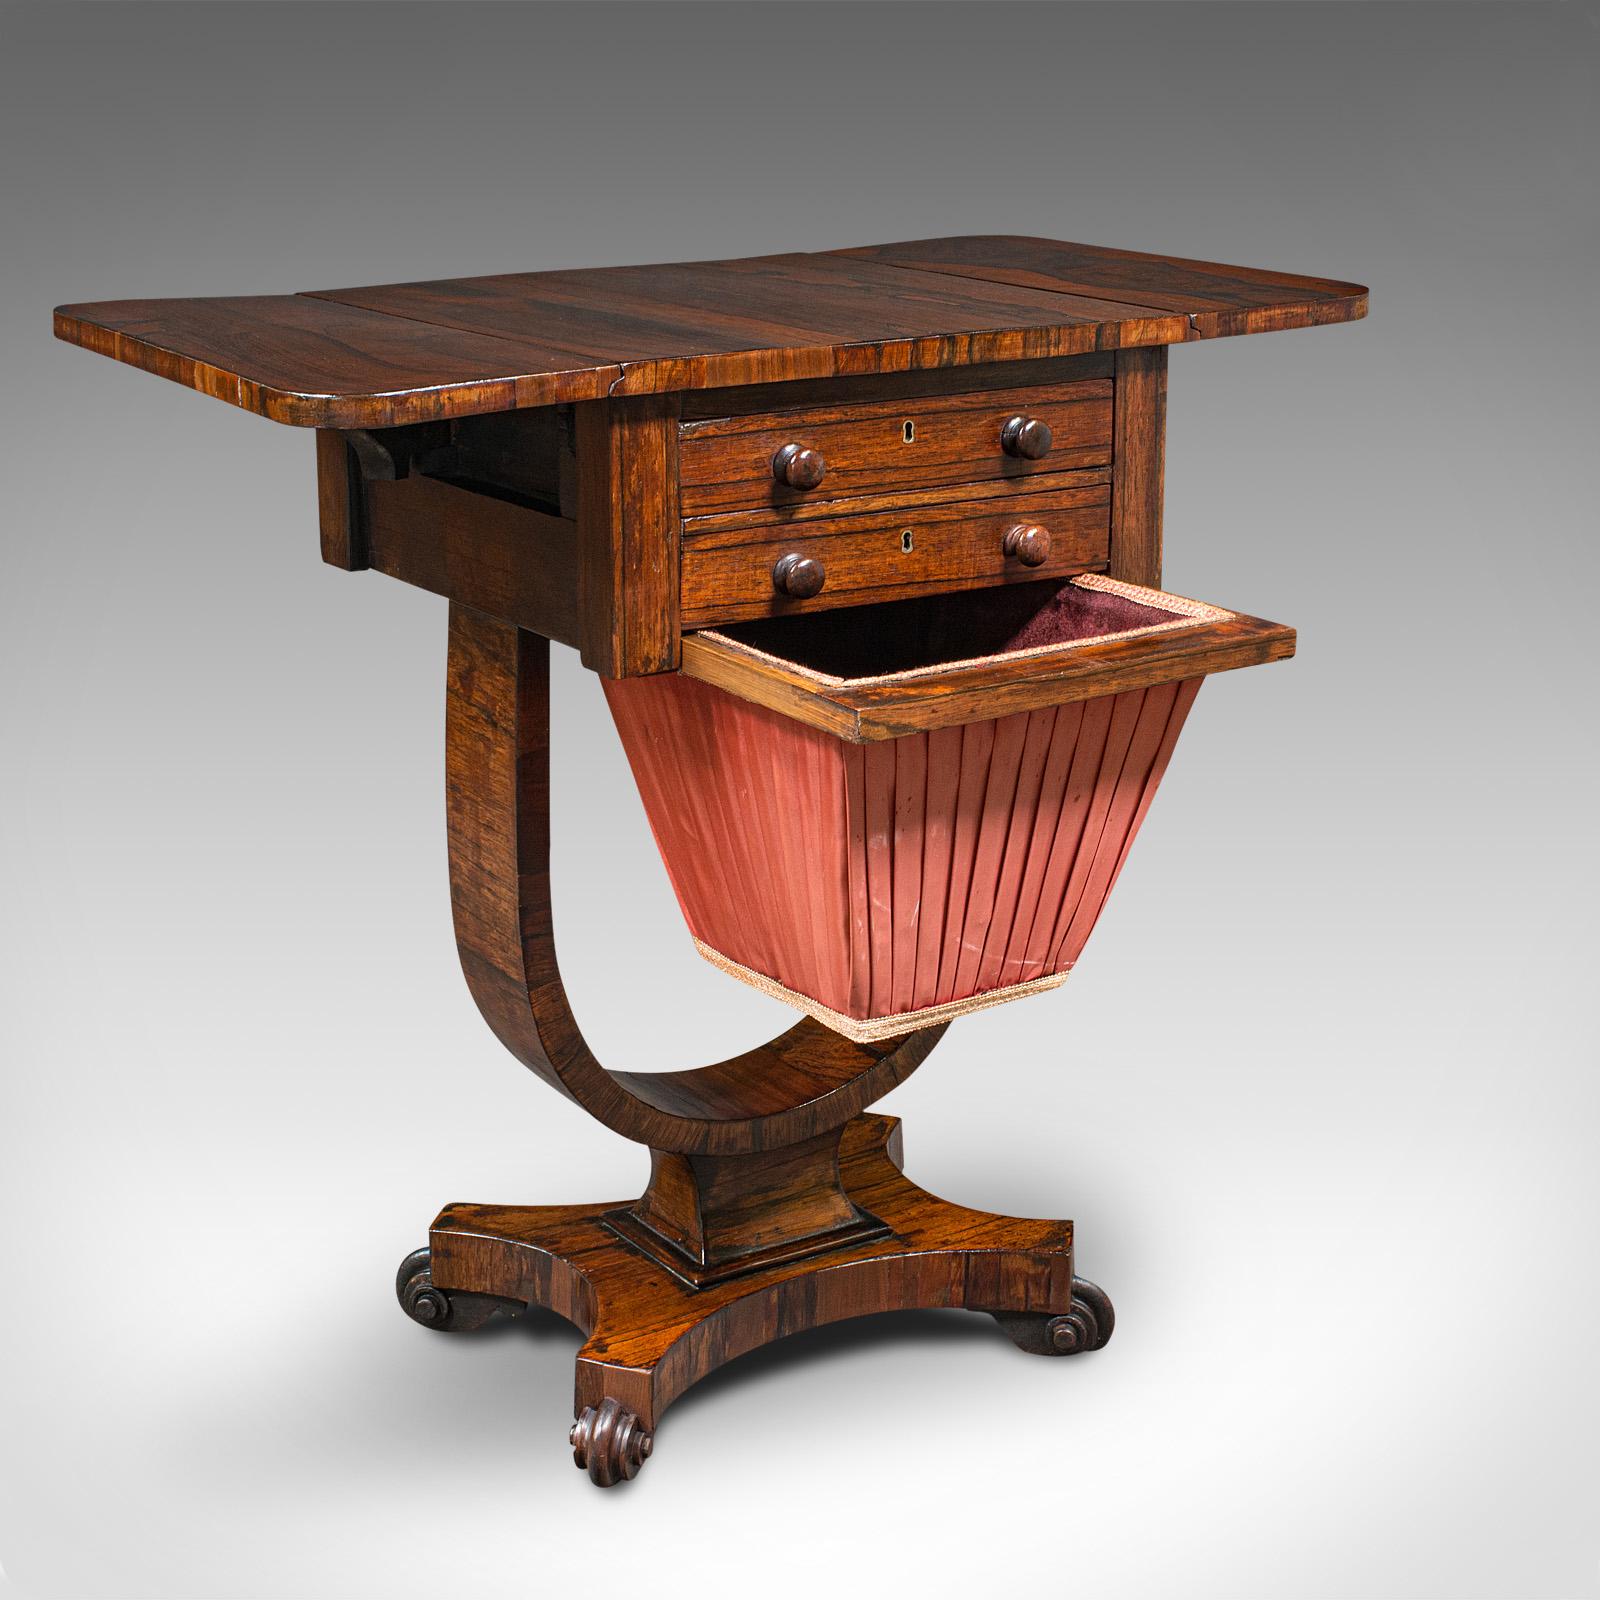 This is an antique drop leaf ladies work table. An English, rosewood sewing or side table with, dating to the William IV period, circa 1835.

Fascinatingly appointed sewing table with wonderful late Georgian craftsmanship
Displaying a desirable aged